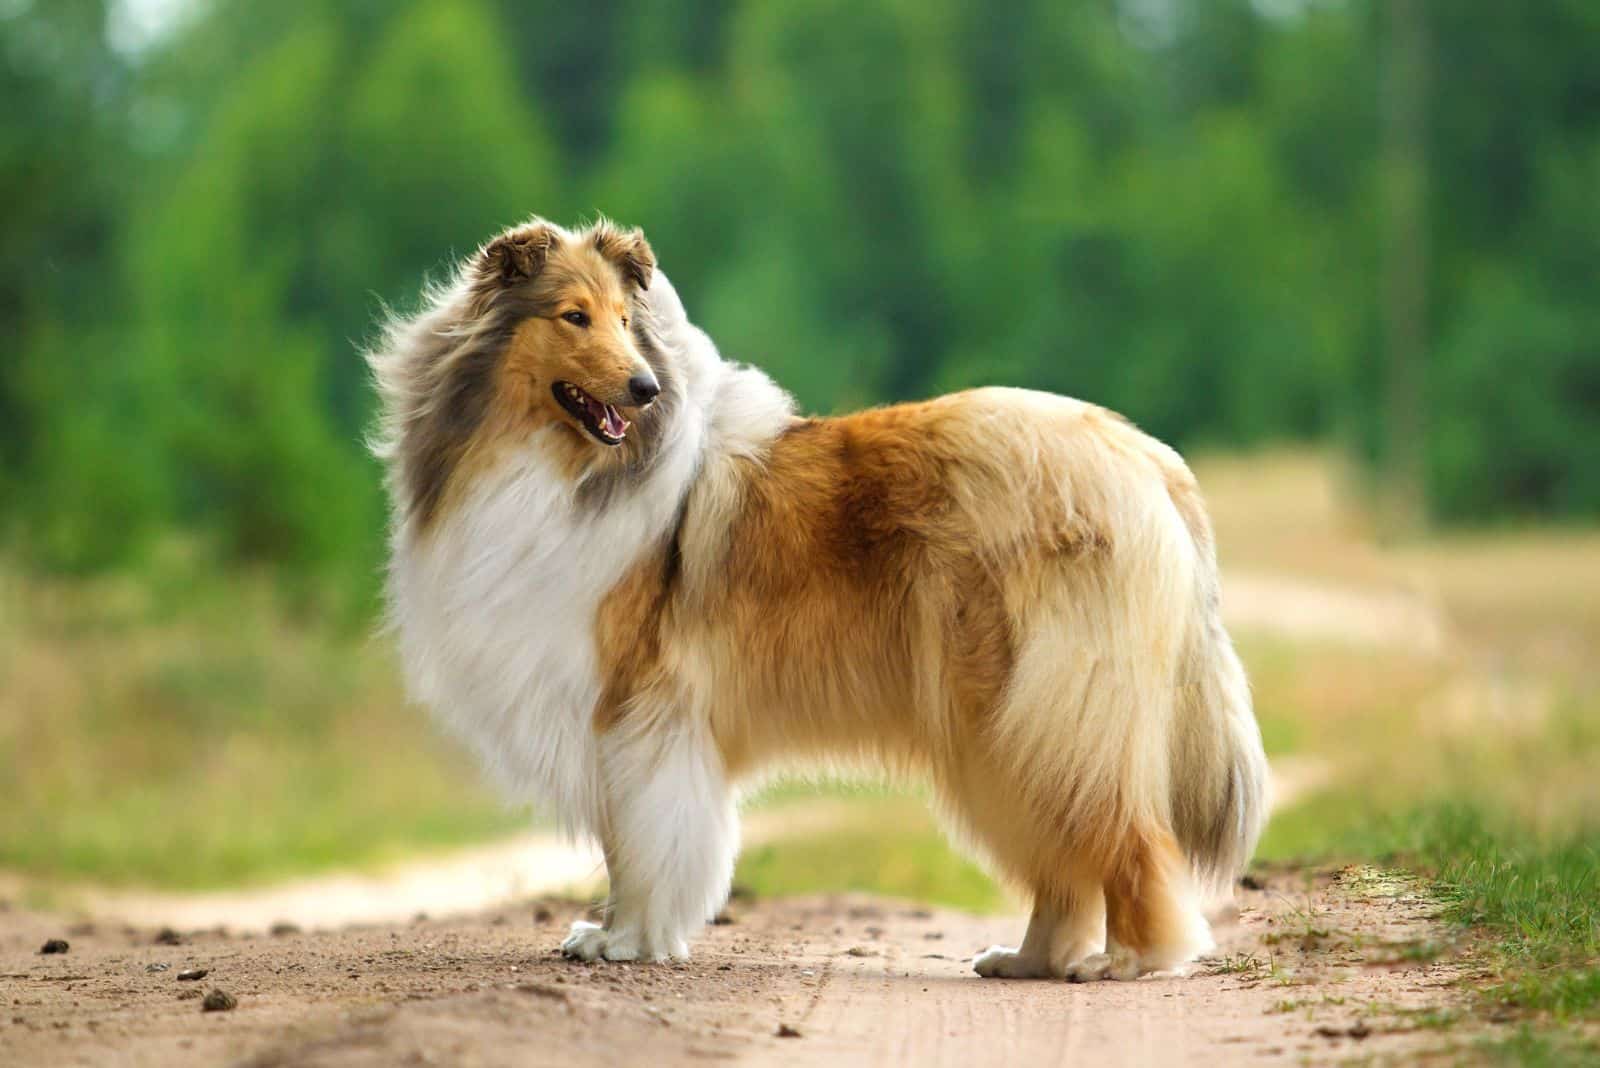 Rough Collie stands on the street and looks around